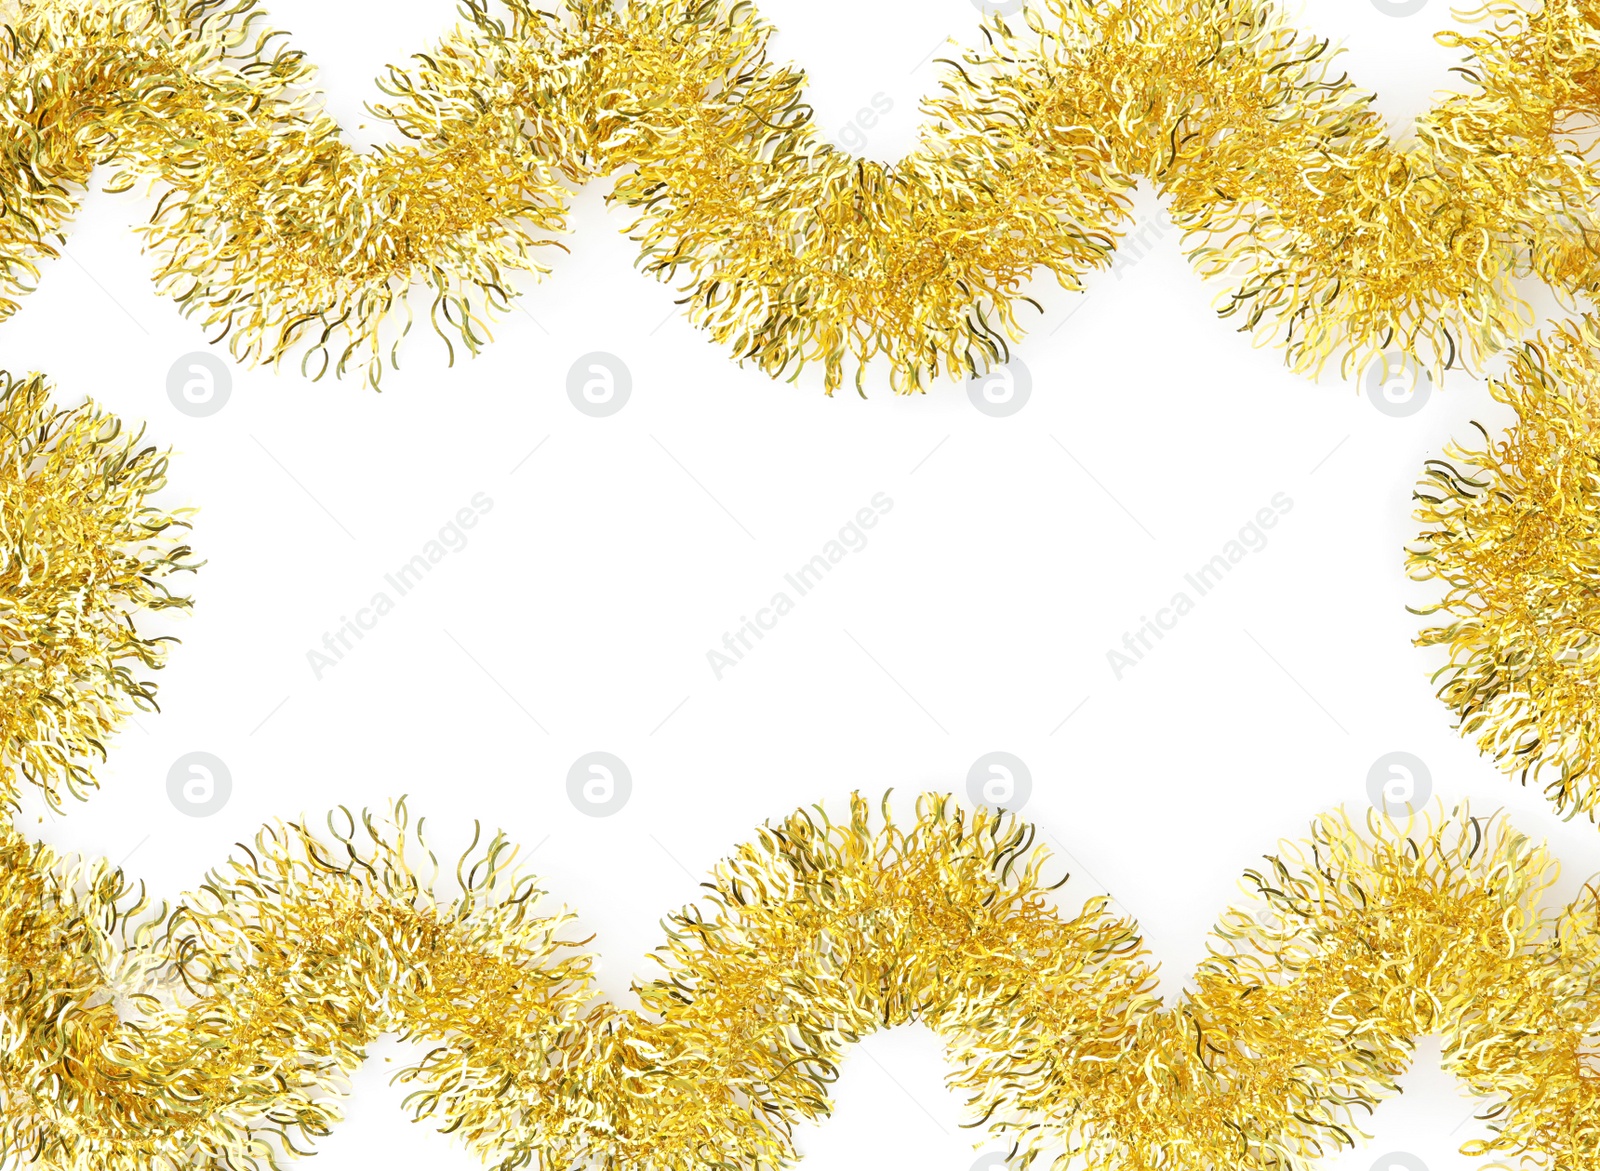 Image of Frame made of shiny golden tinsels on white background, top view. Space for text